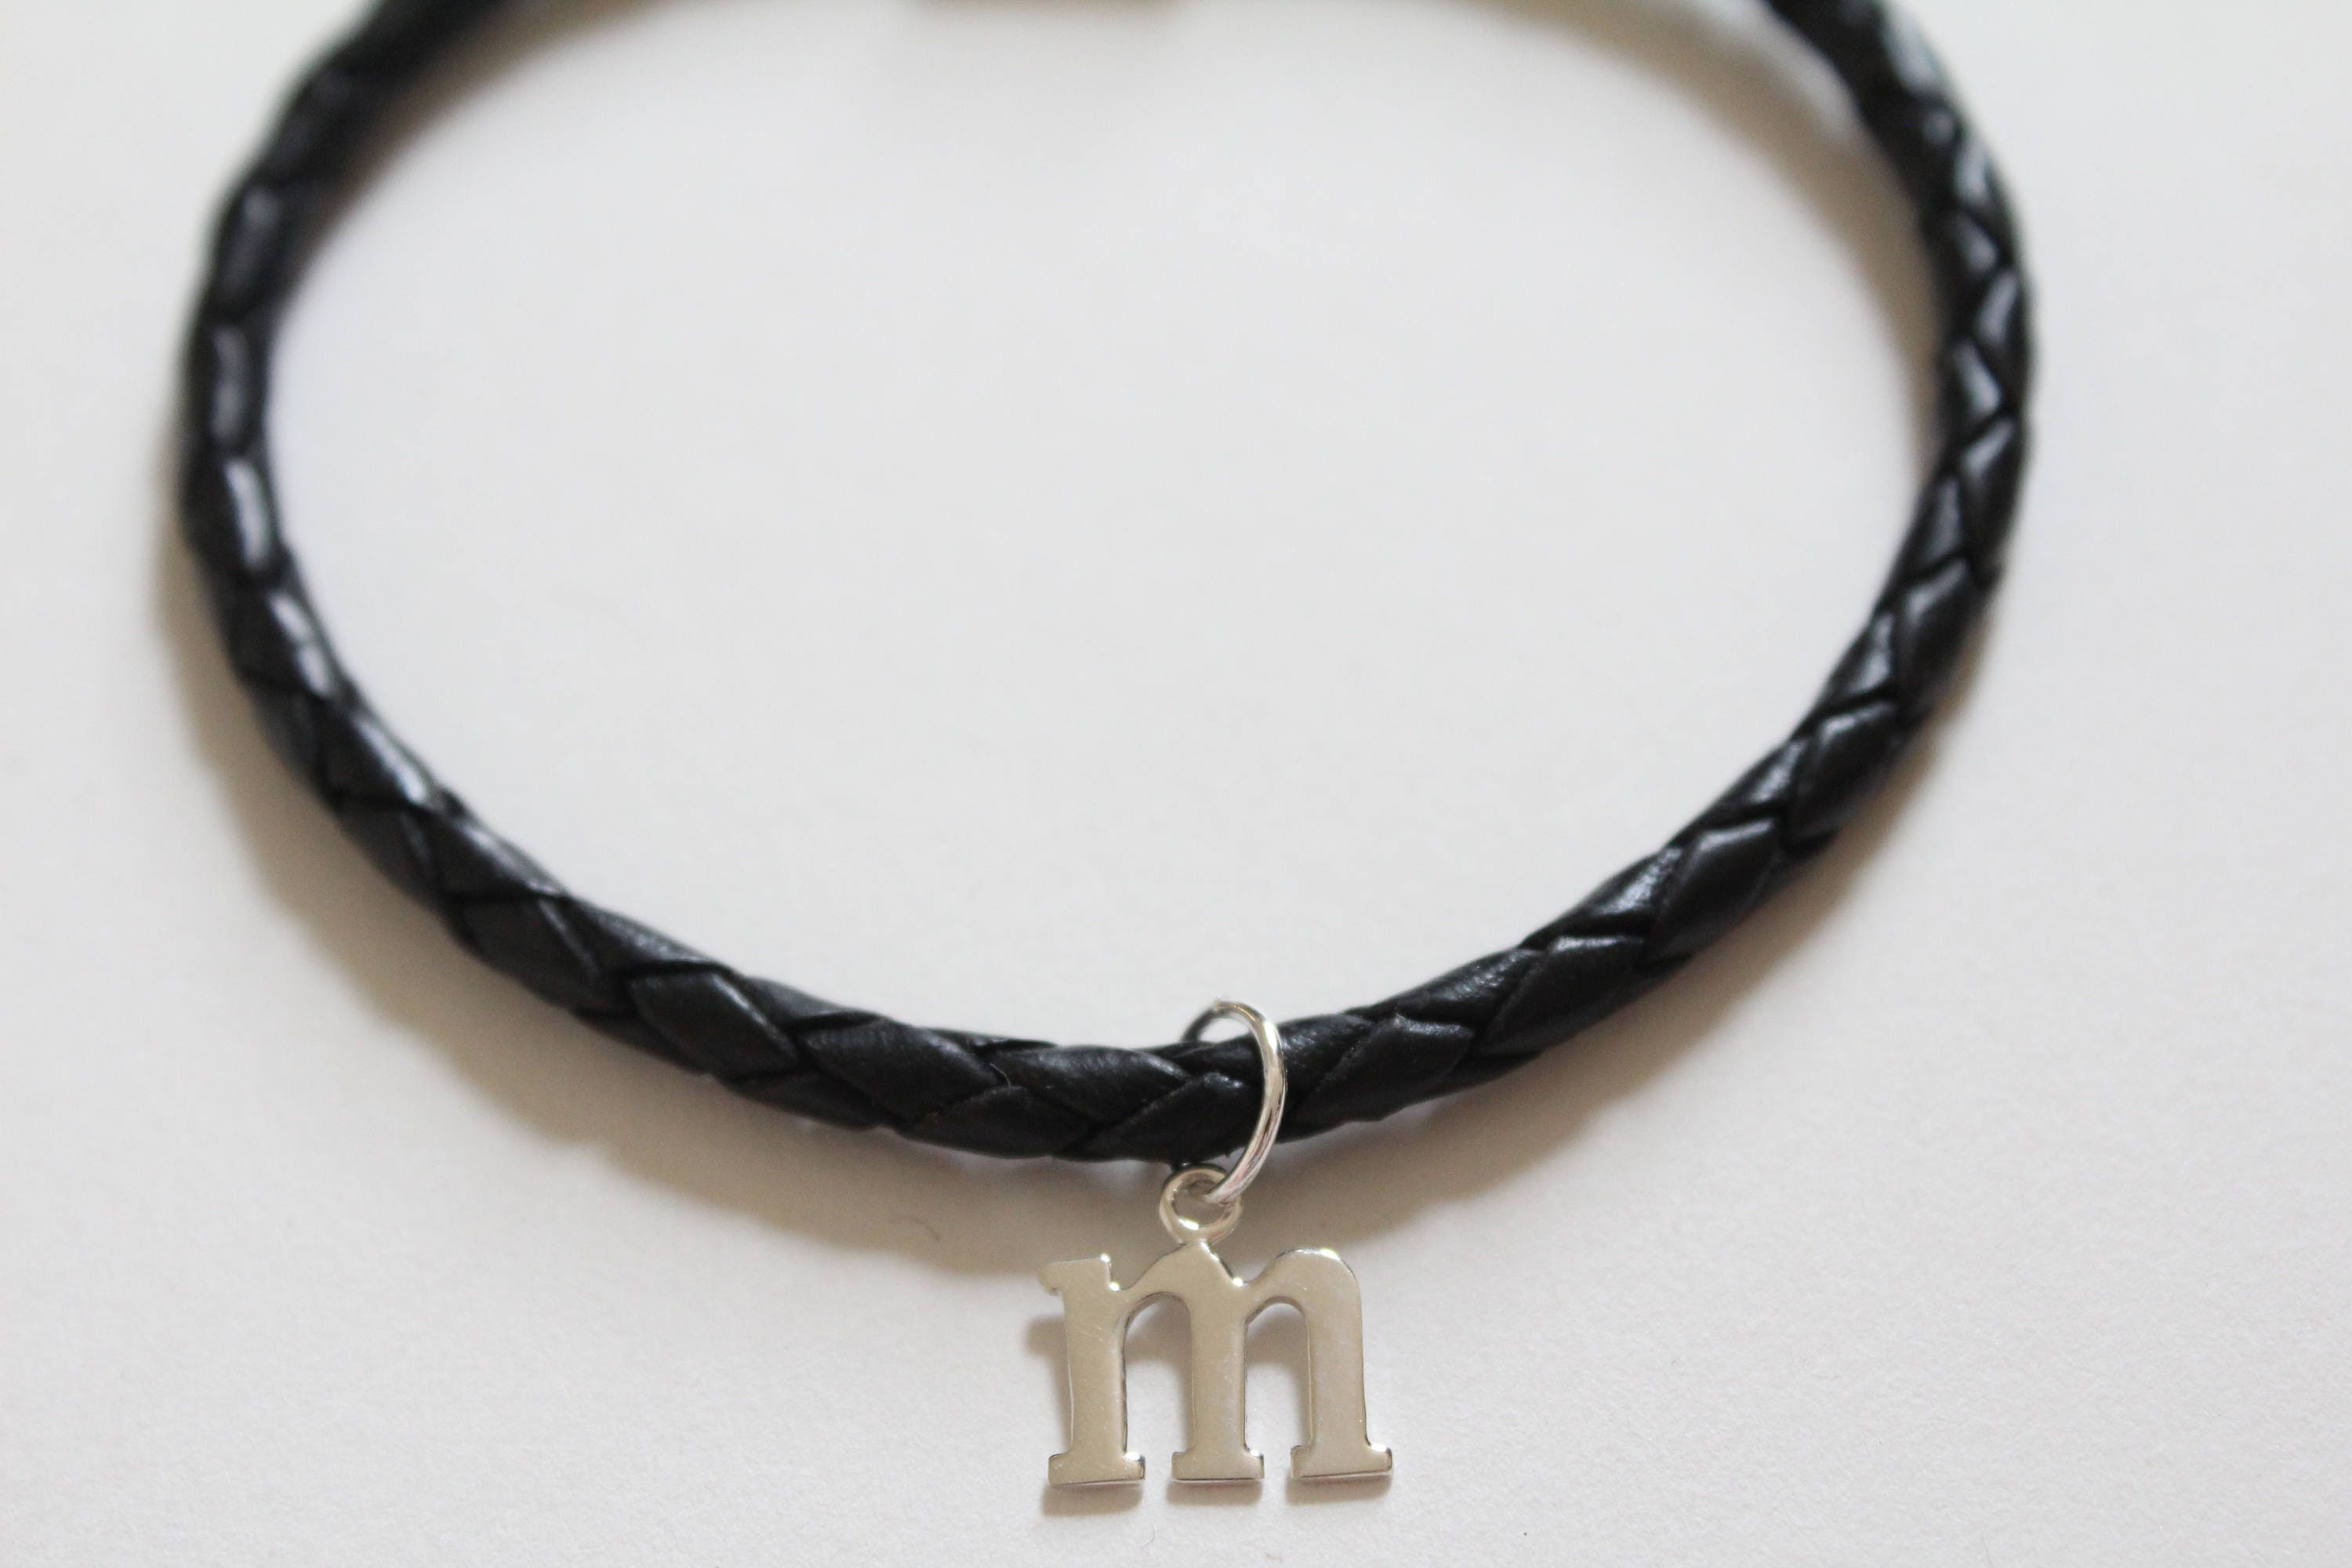 Leather Bracelet with Sterling Silver Typewriter M Letter Charm